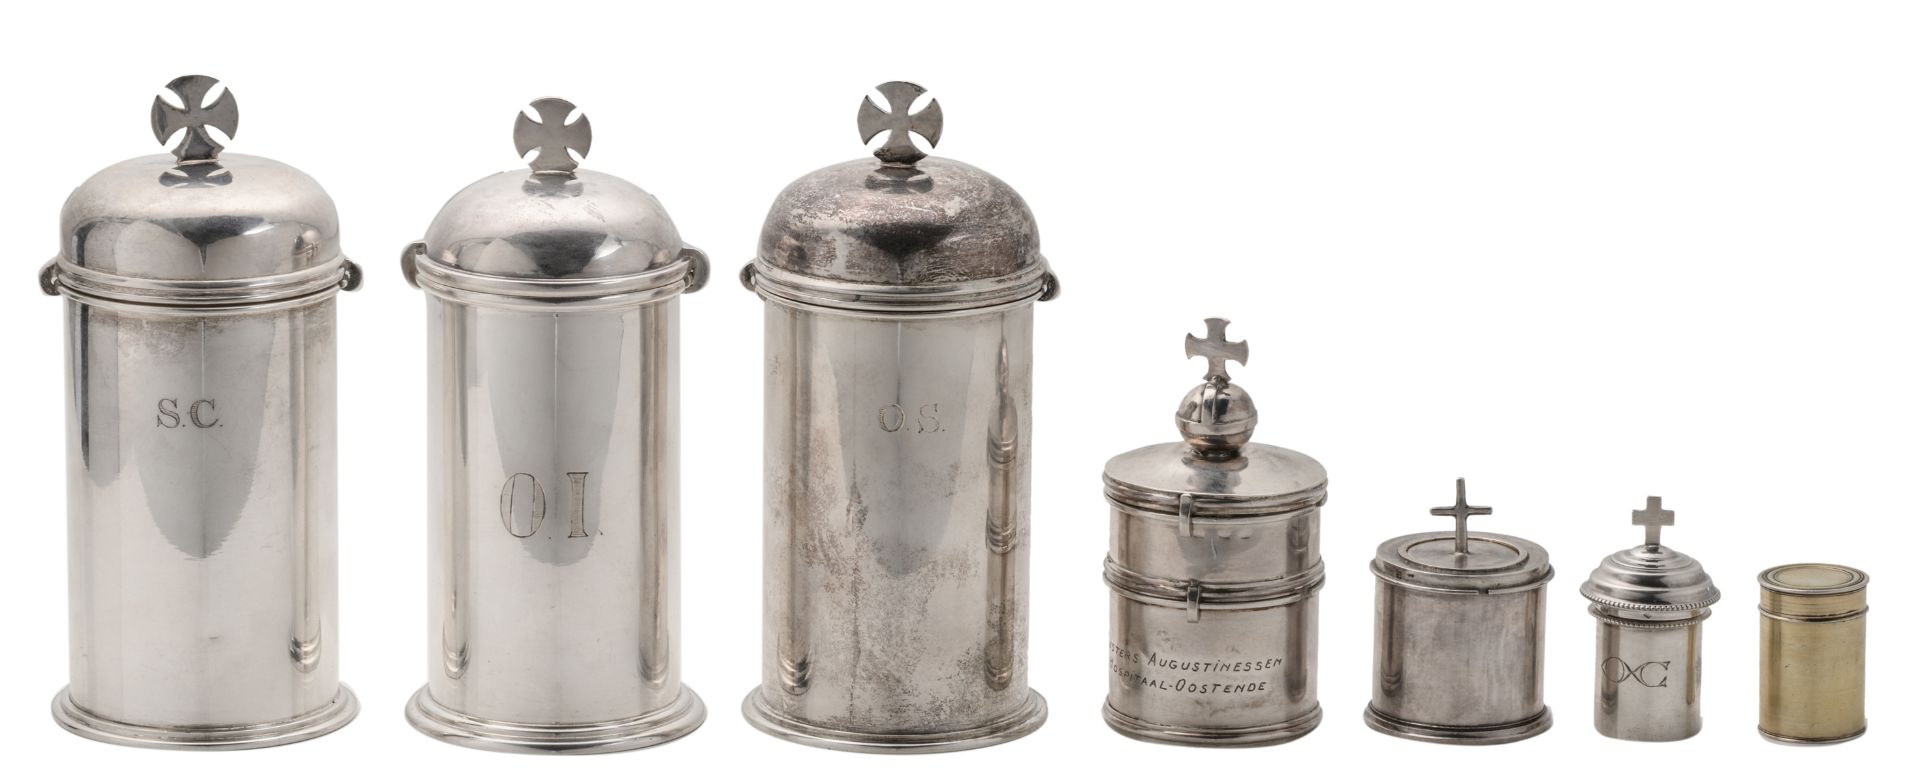 A second half of the 18thC silver chrismatory, Bruges hallmarks, makers' mark Adrianus Buschop (